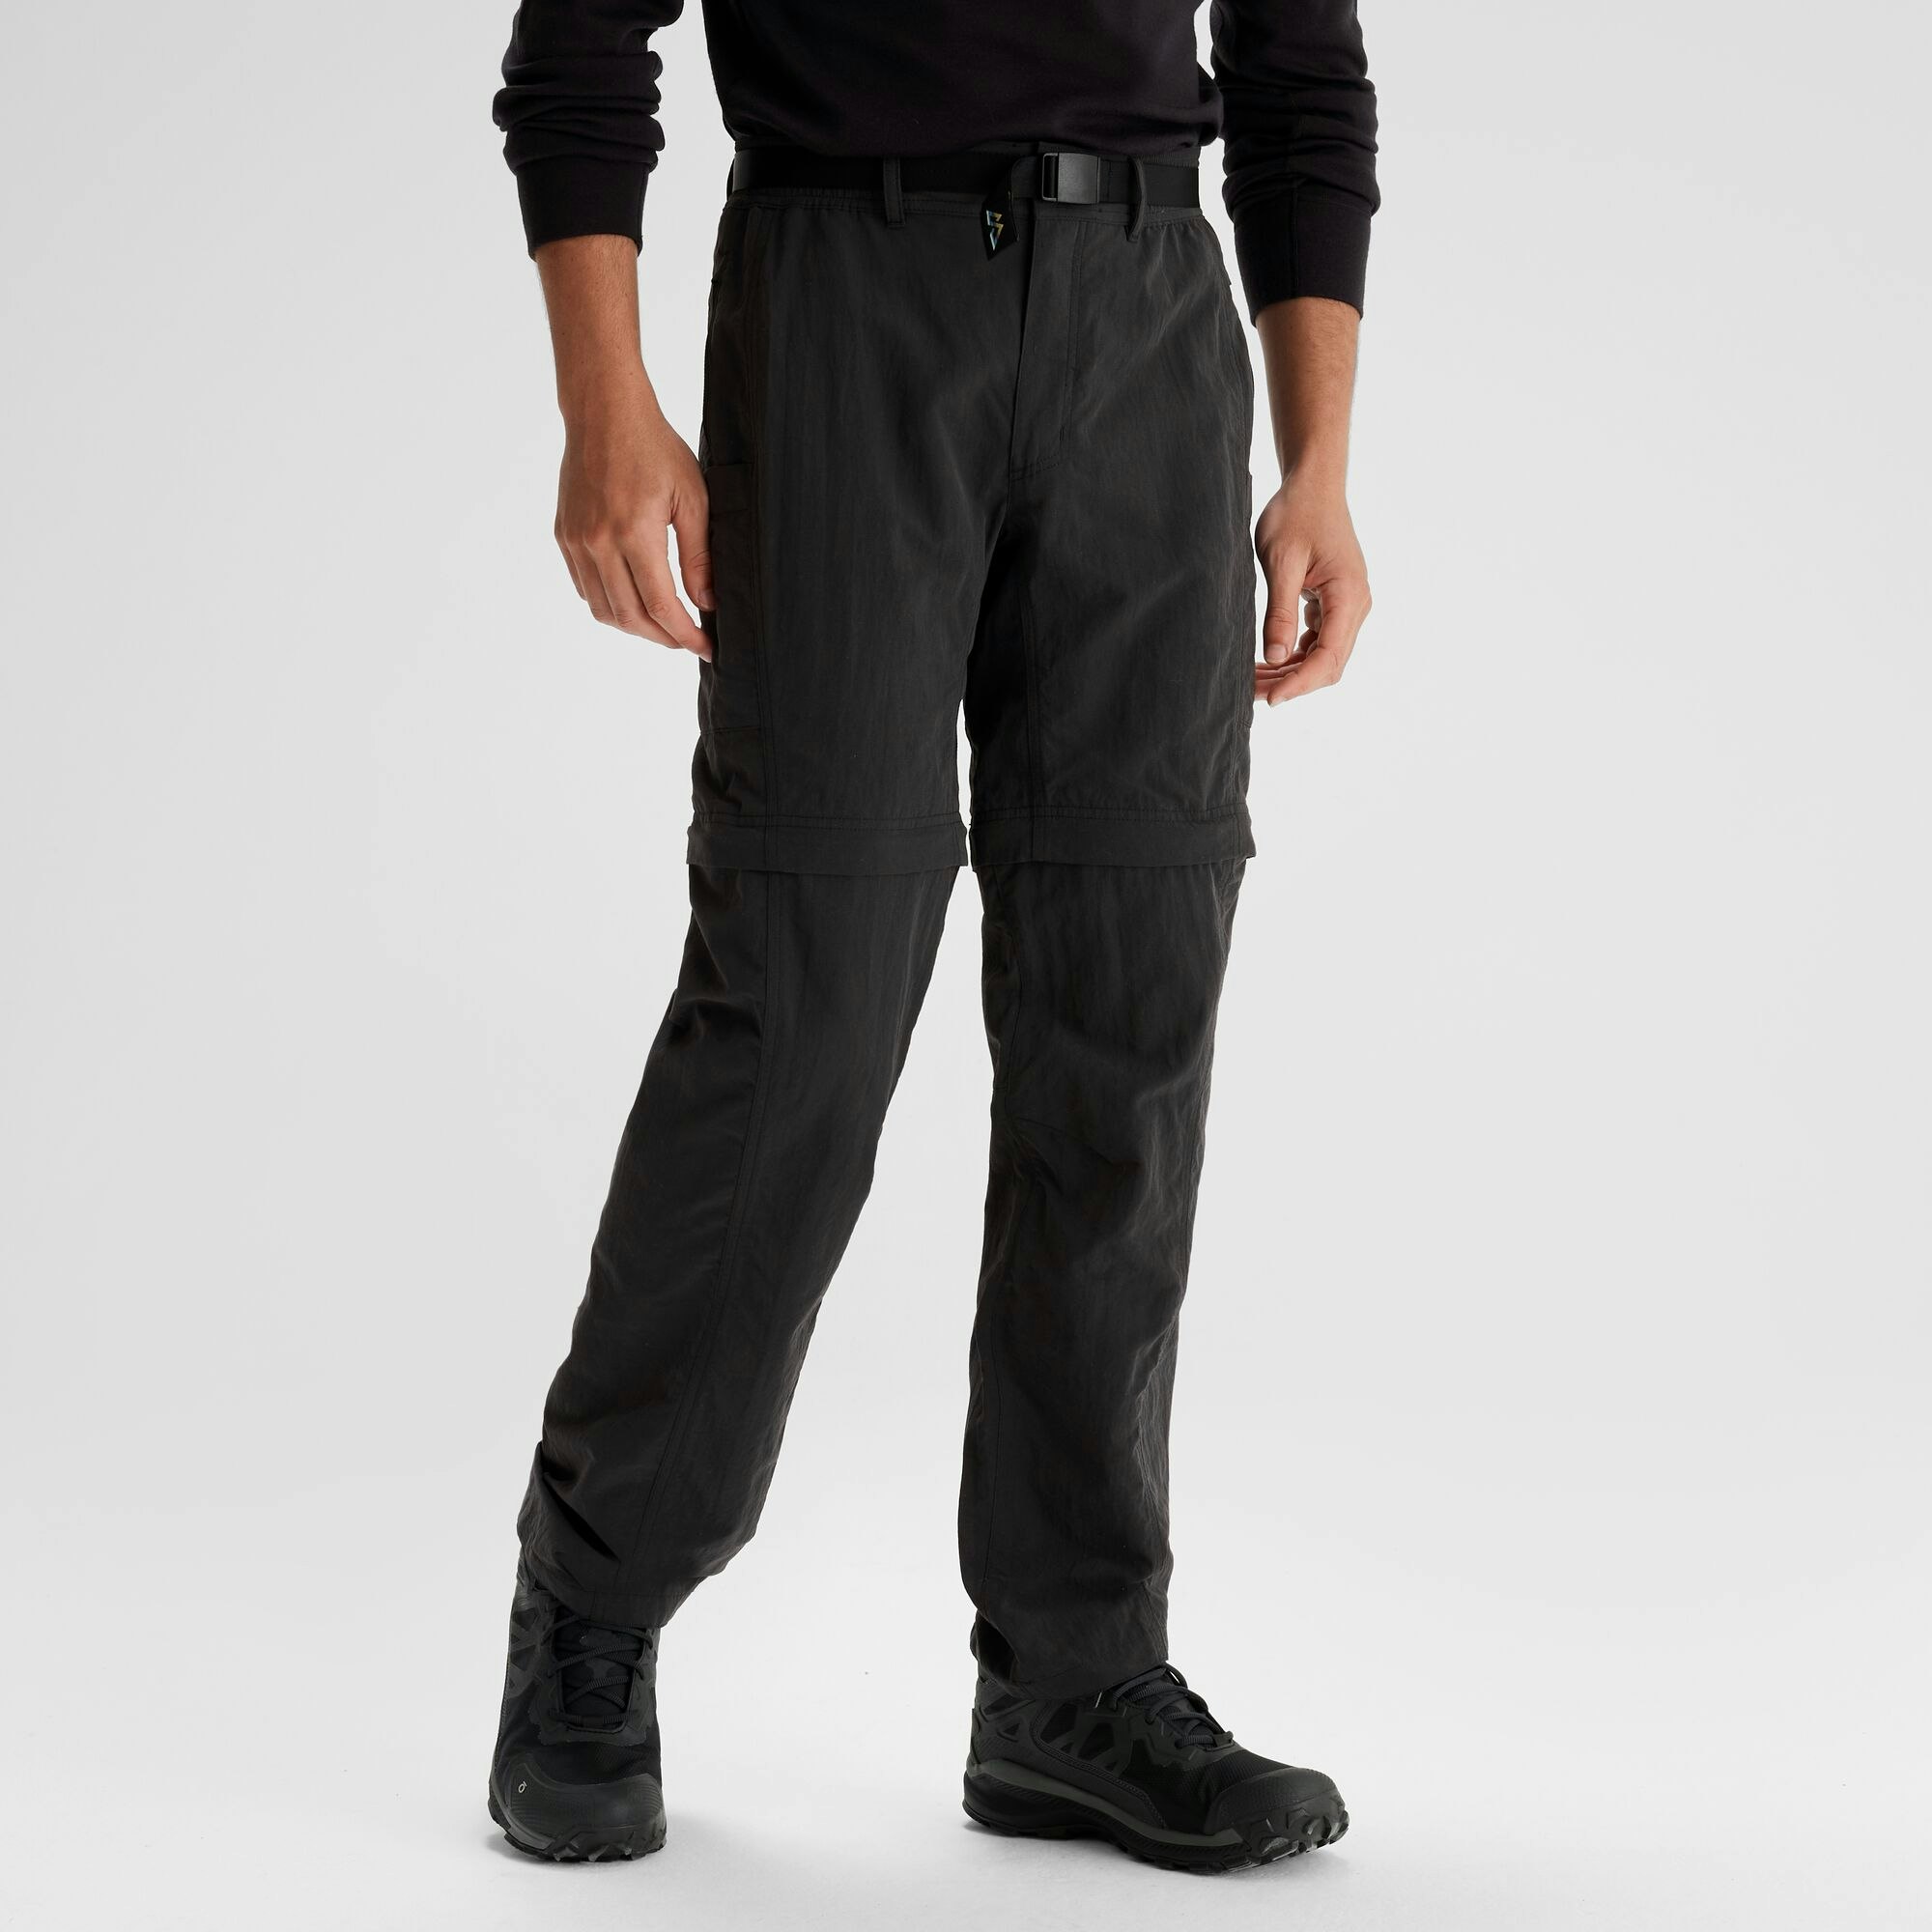 BC Clothing Men Lightweight Convertible Stretch Cargo Pants & Shorts :  Amazon.in: Clothing & Accessories